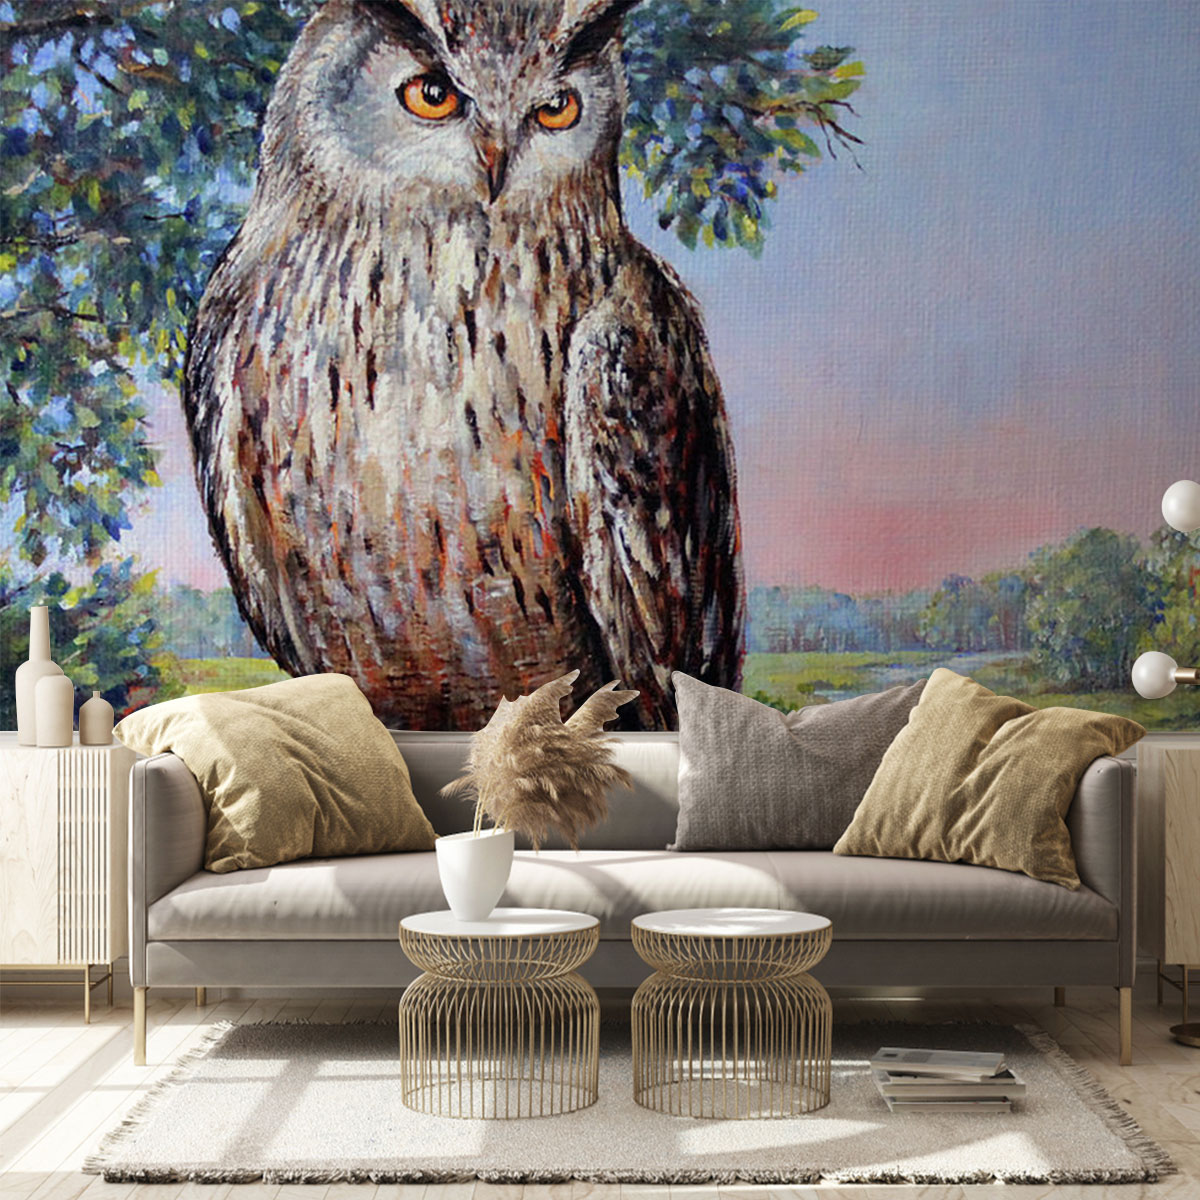 Landscape With Owl Wall Mural_2_1